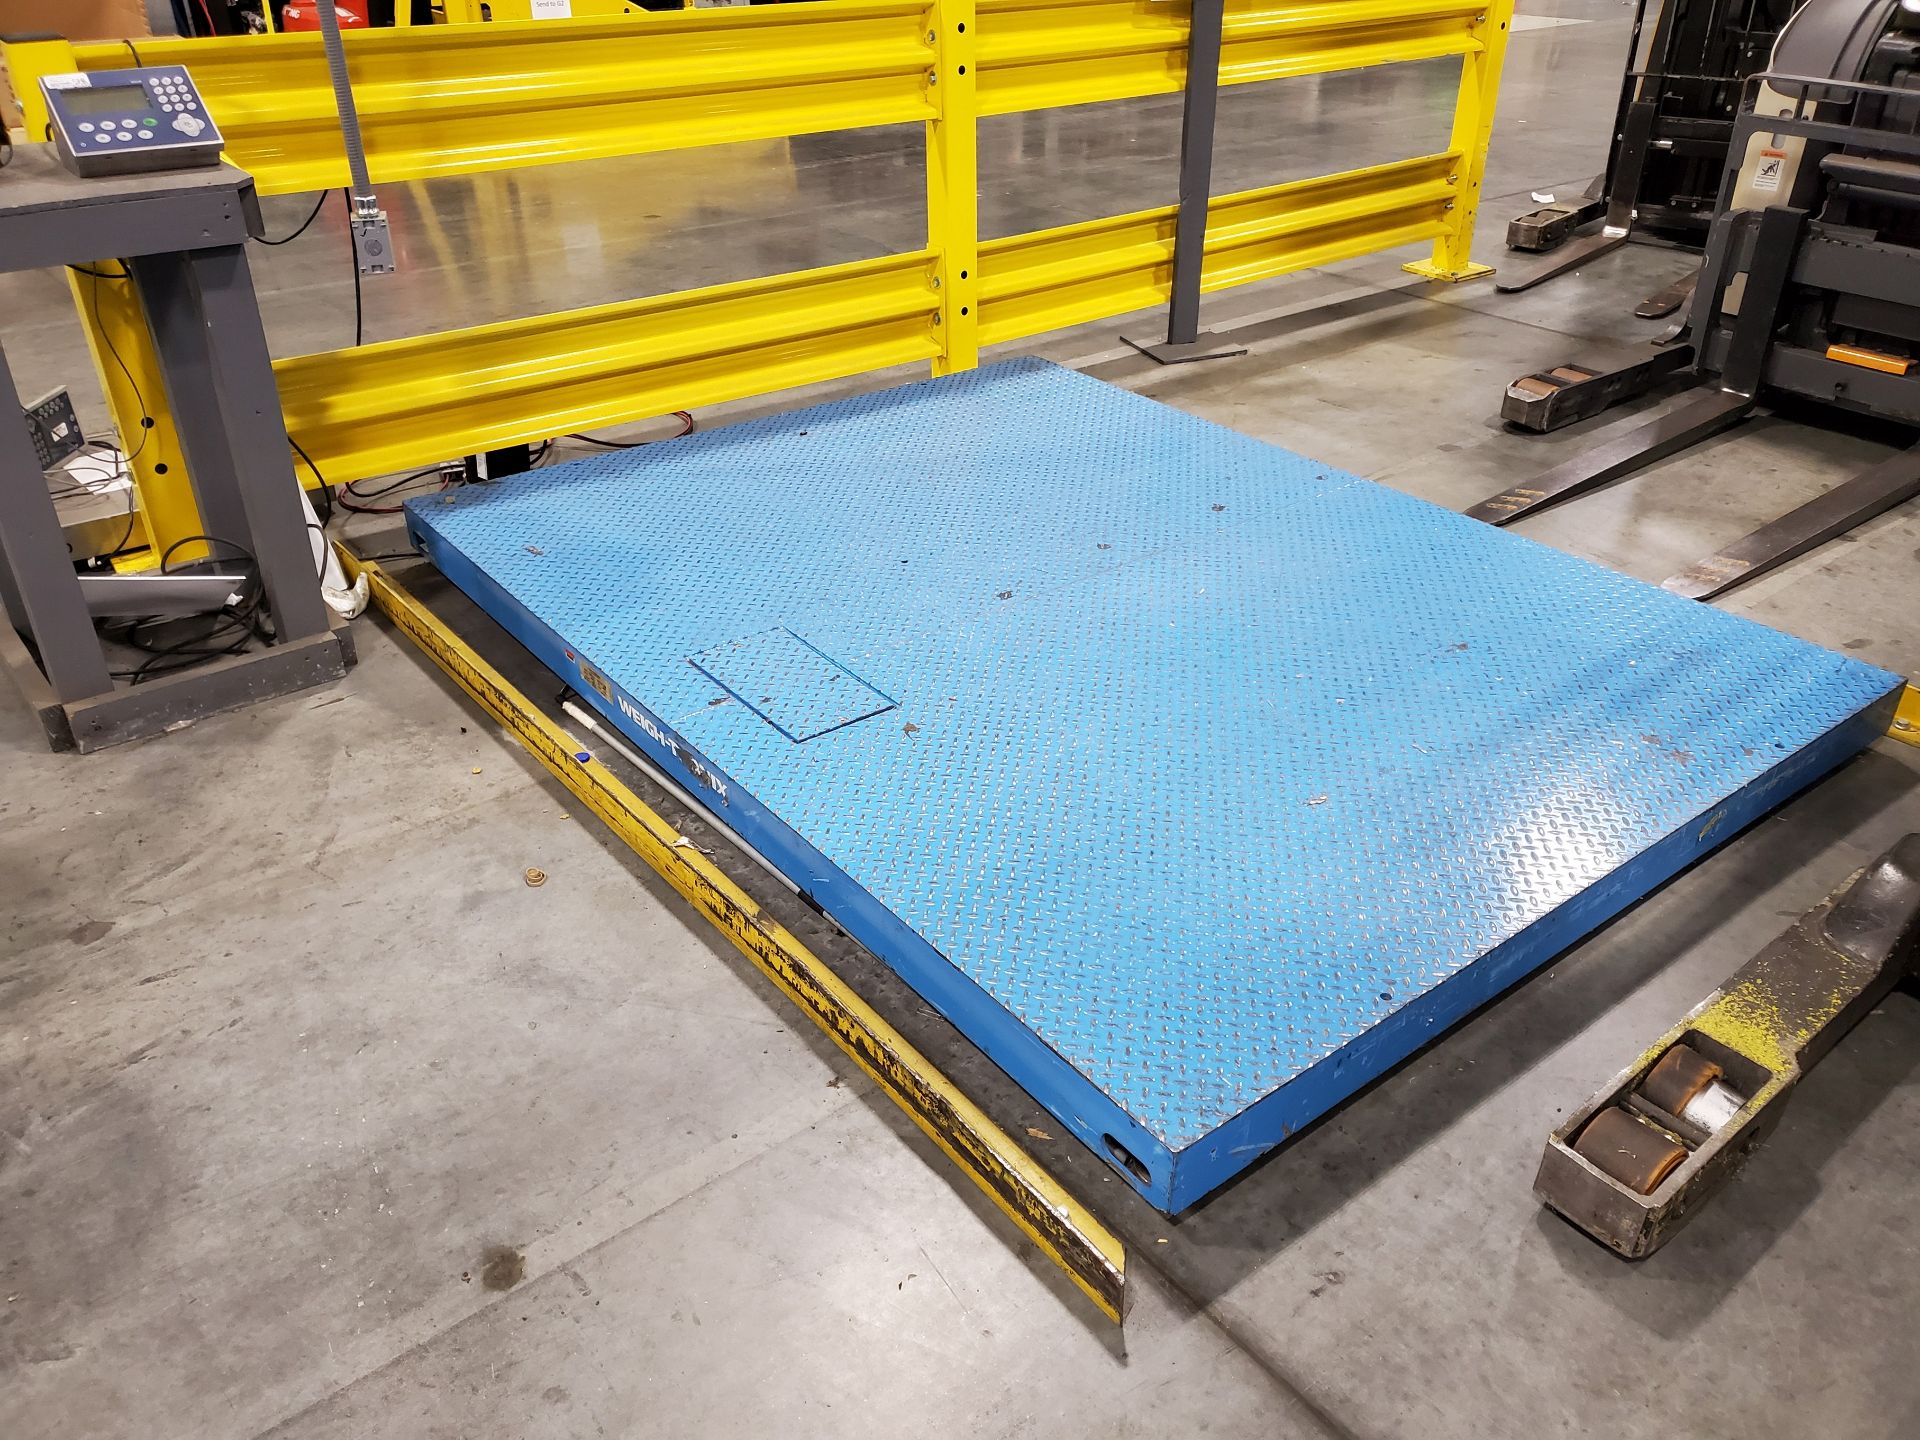 96''X 72'' AVERY WEIGHT-TRONIX DIGITAL FLOOR SCALE WITH METTLER-TOLEDO IND246 DRO UNIT, MODEL